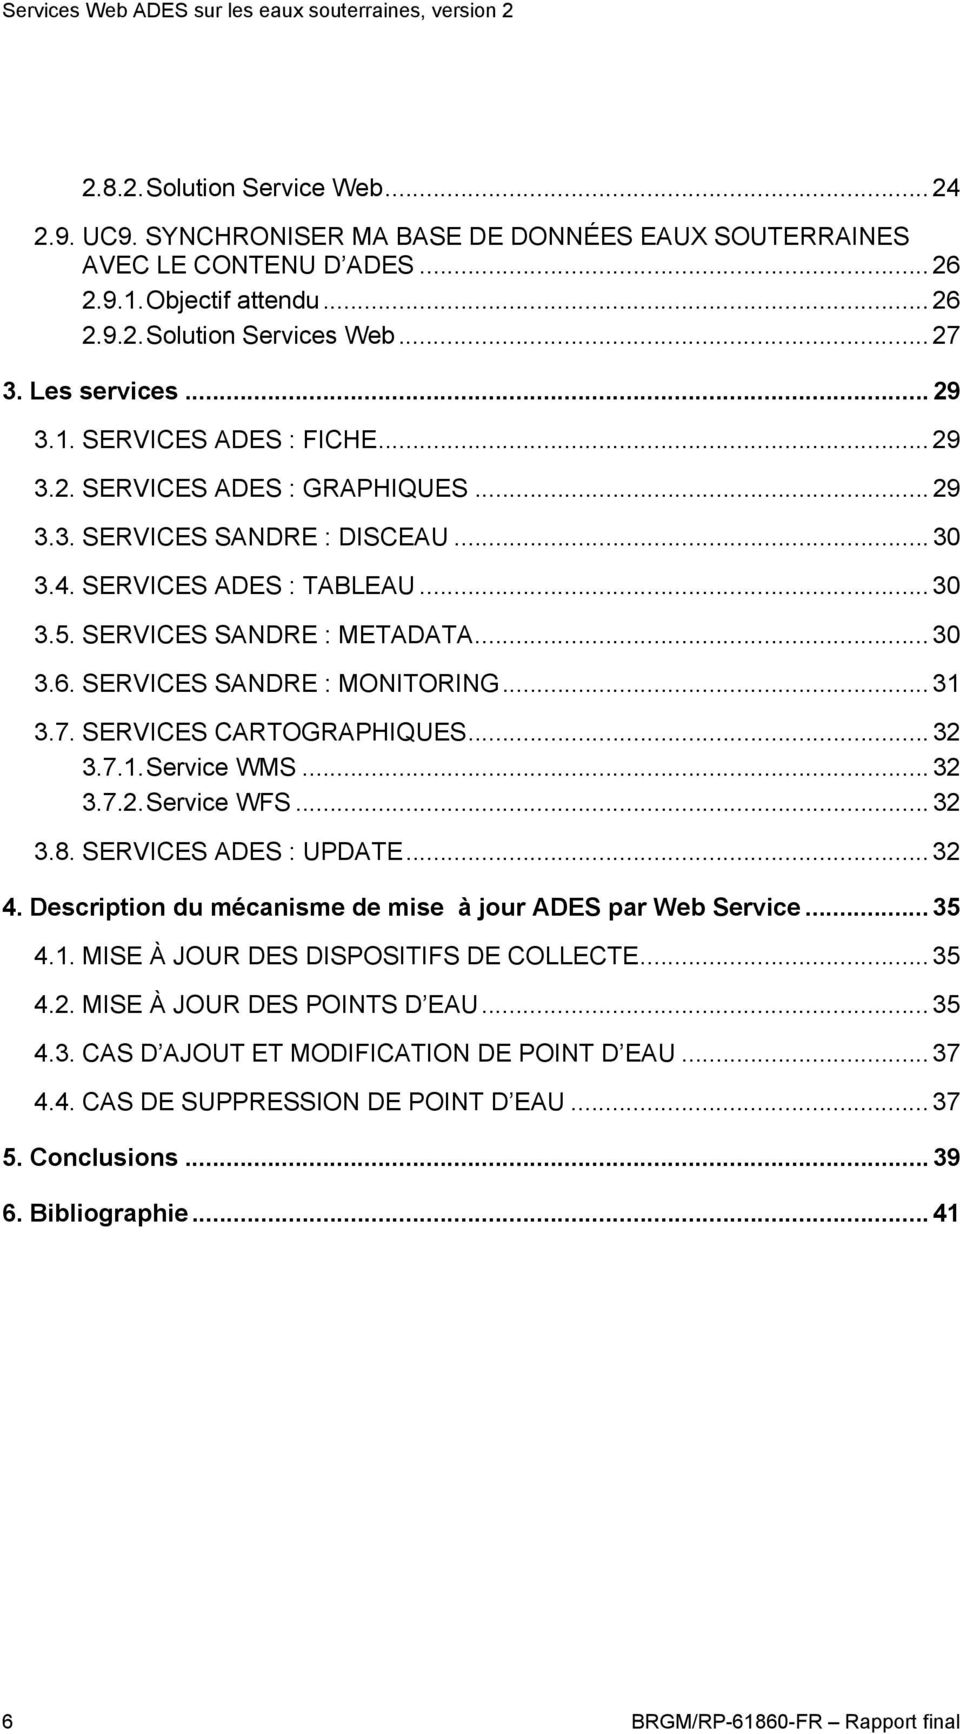 SERVICES SANDRE : MONITORING... 31 3.7. SERVICES CARTOGRAPHIQUES... 32 3.7.1. Service WMS... 32 3.7.2. Service WFS... 32 3.8. SERVICES ADES : UPDATE... 32 4.